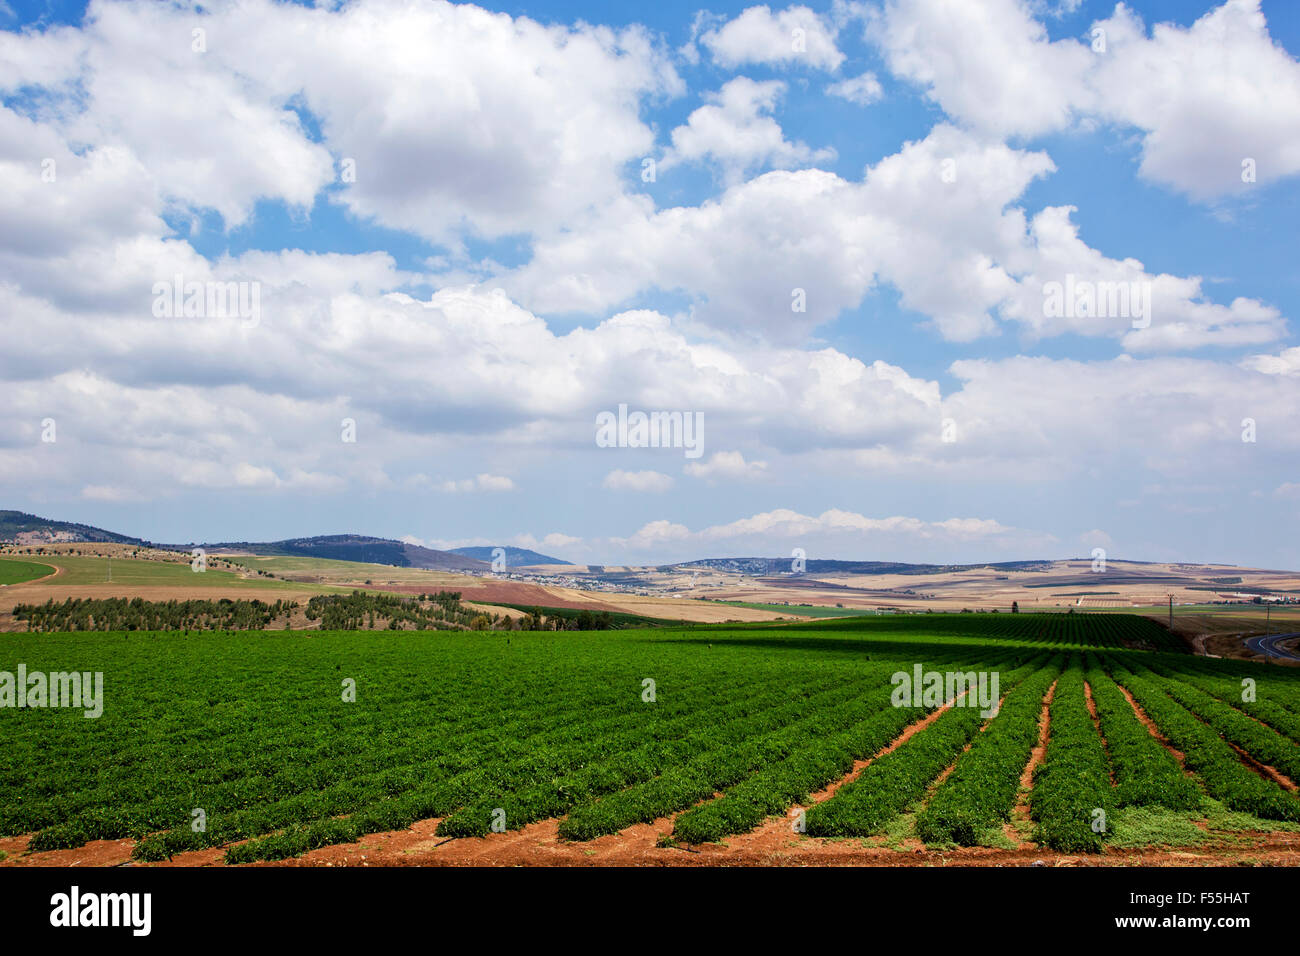 Israel, Jezreel valley, agricultural fields with crops, Northern Israel Stock Photo